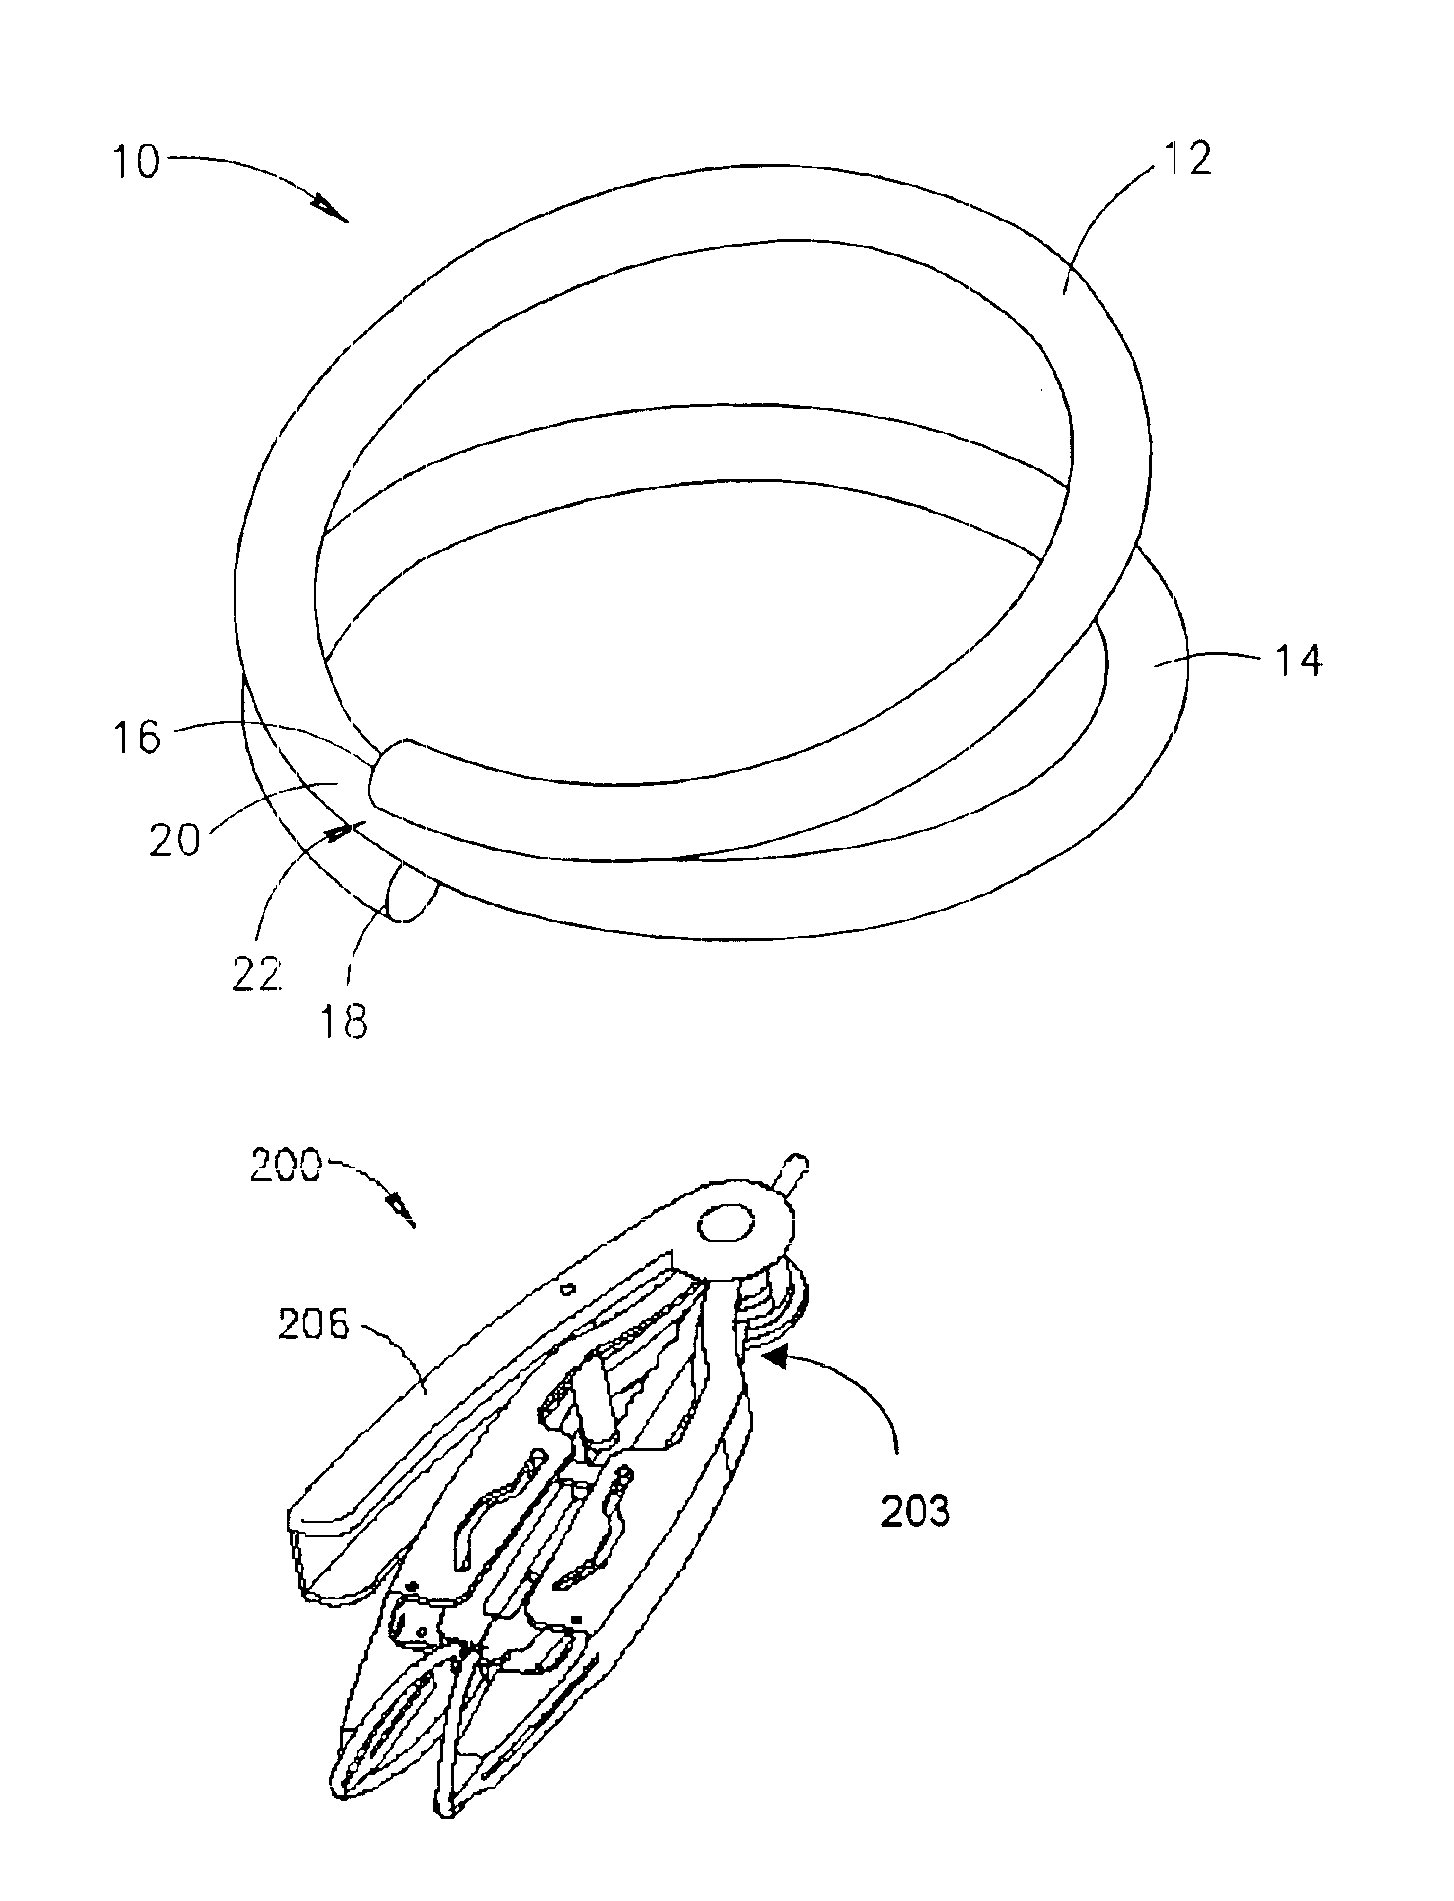 Surgical clip applicator device